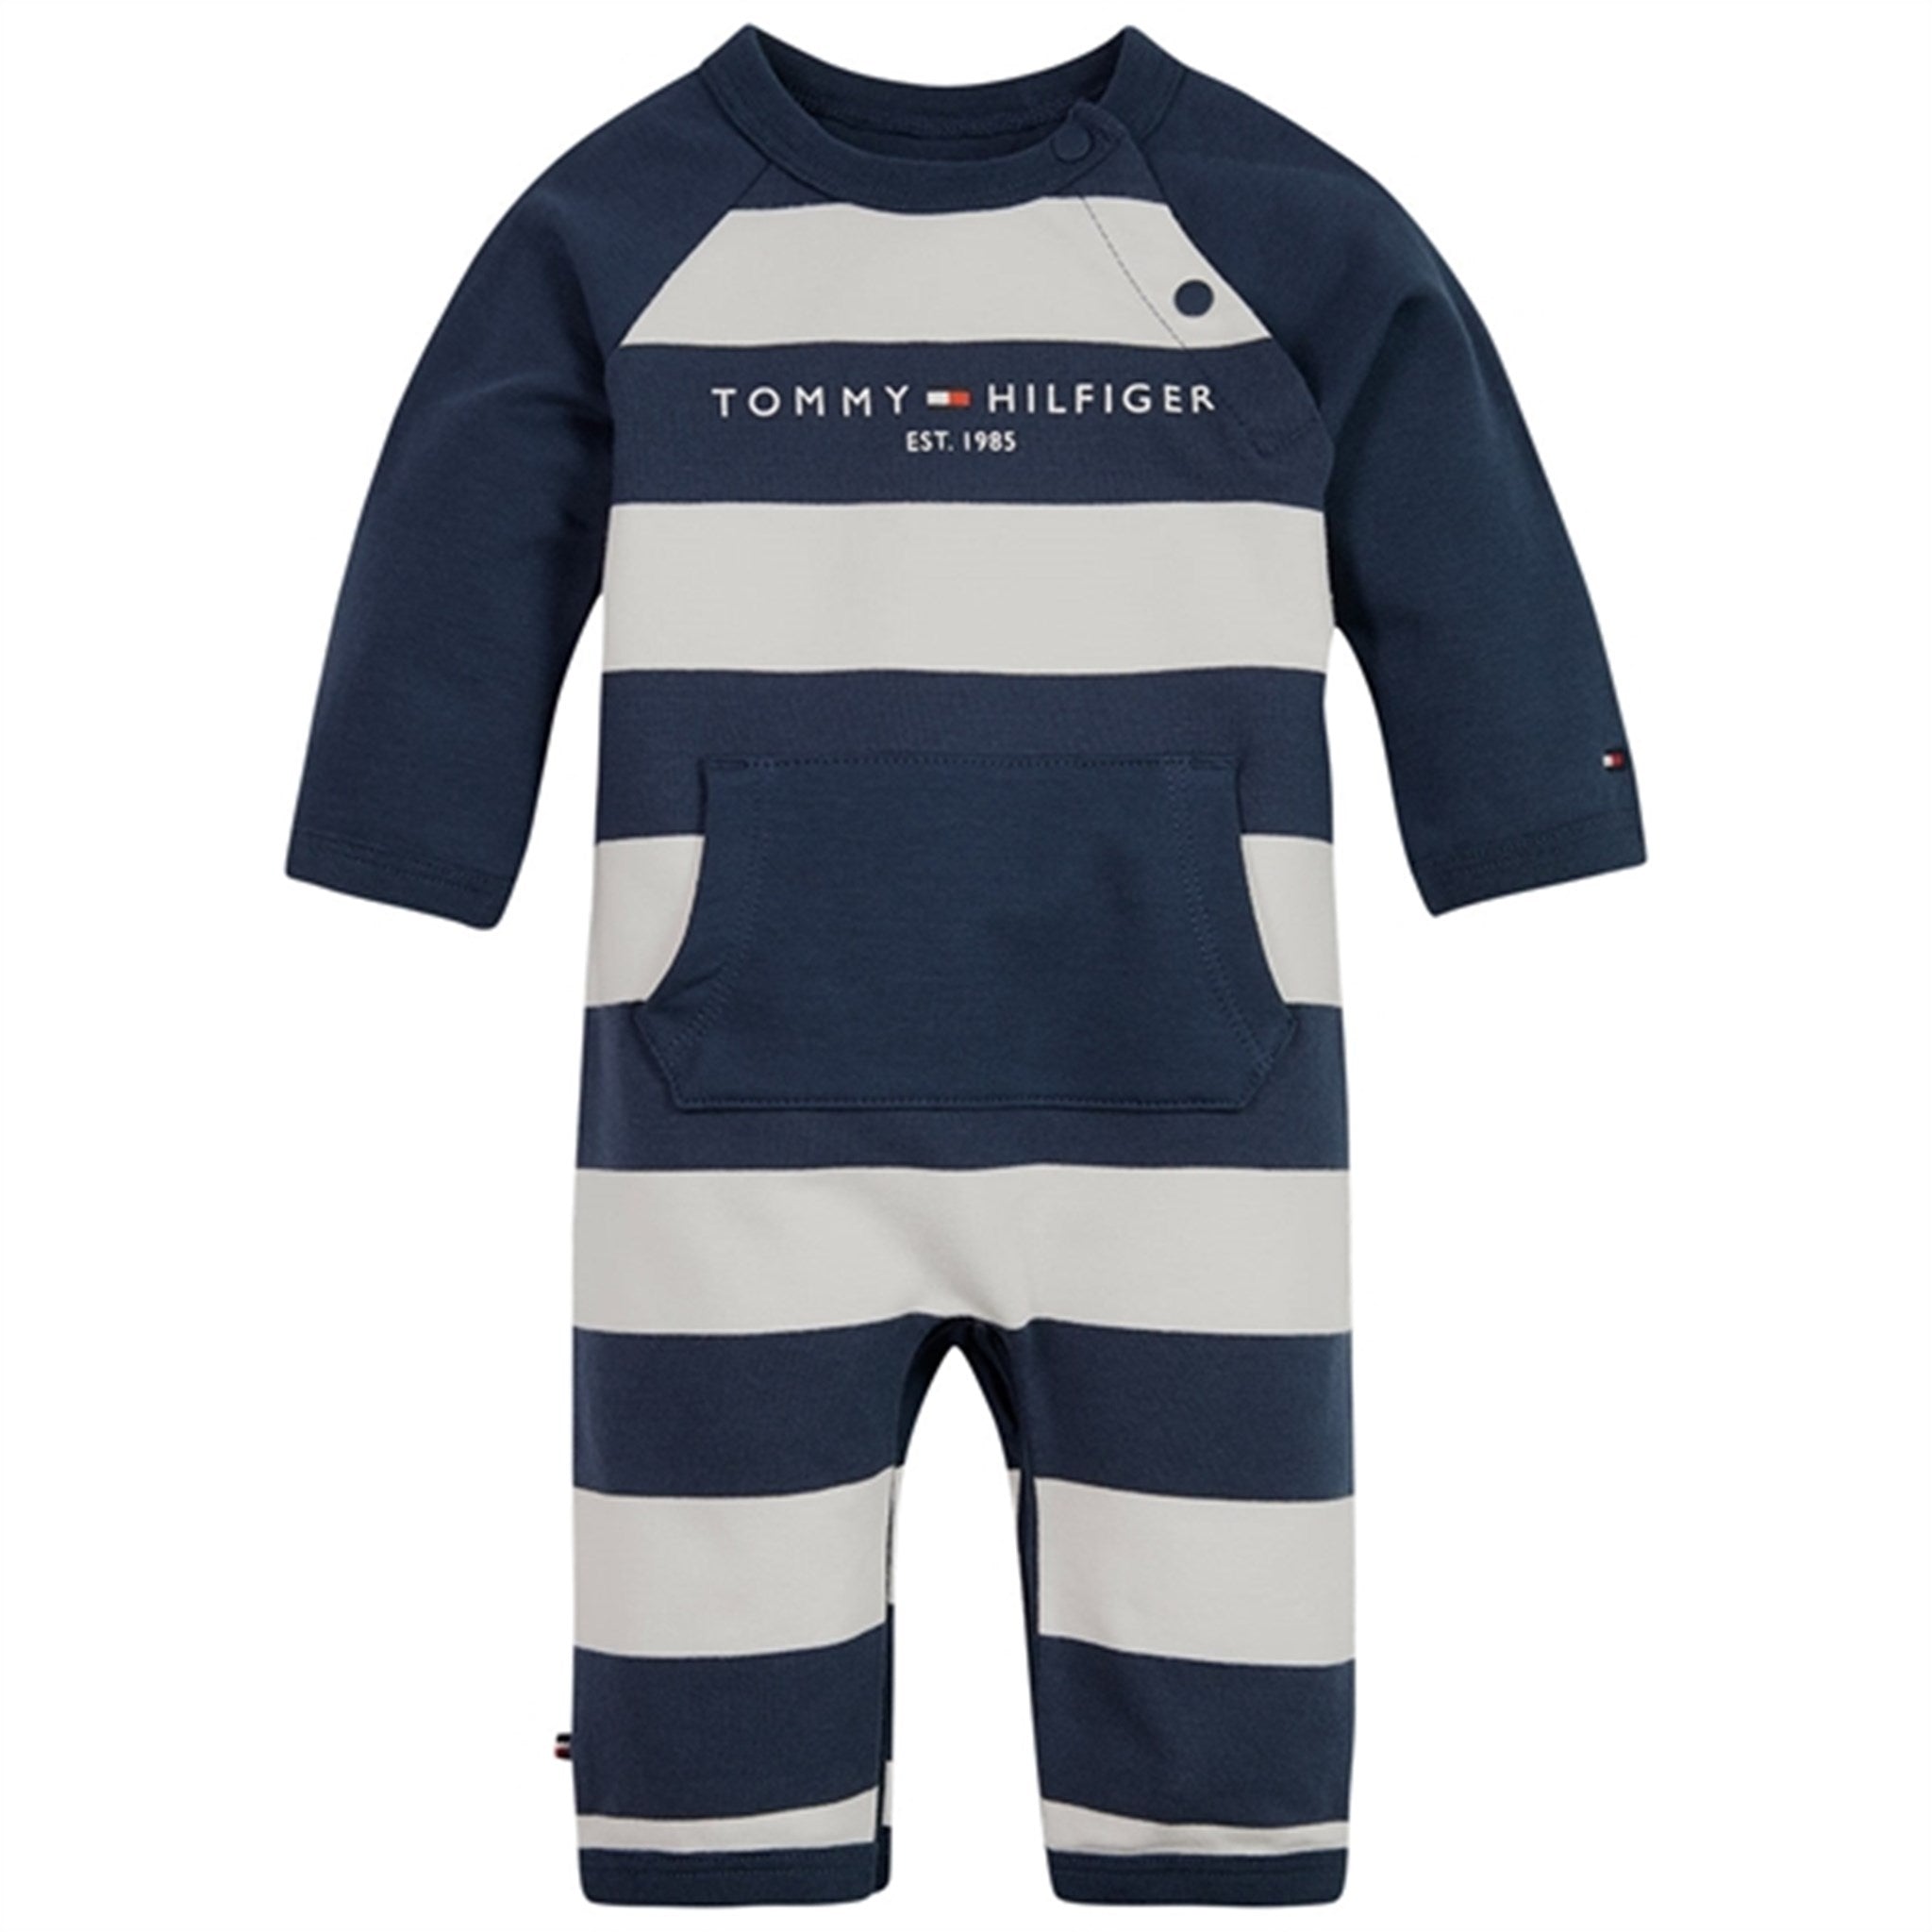 Tommy Hilfiger Baby Rugby Stripe Coverall Twilight Navy Stripe